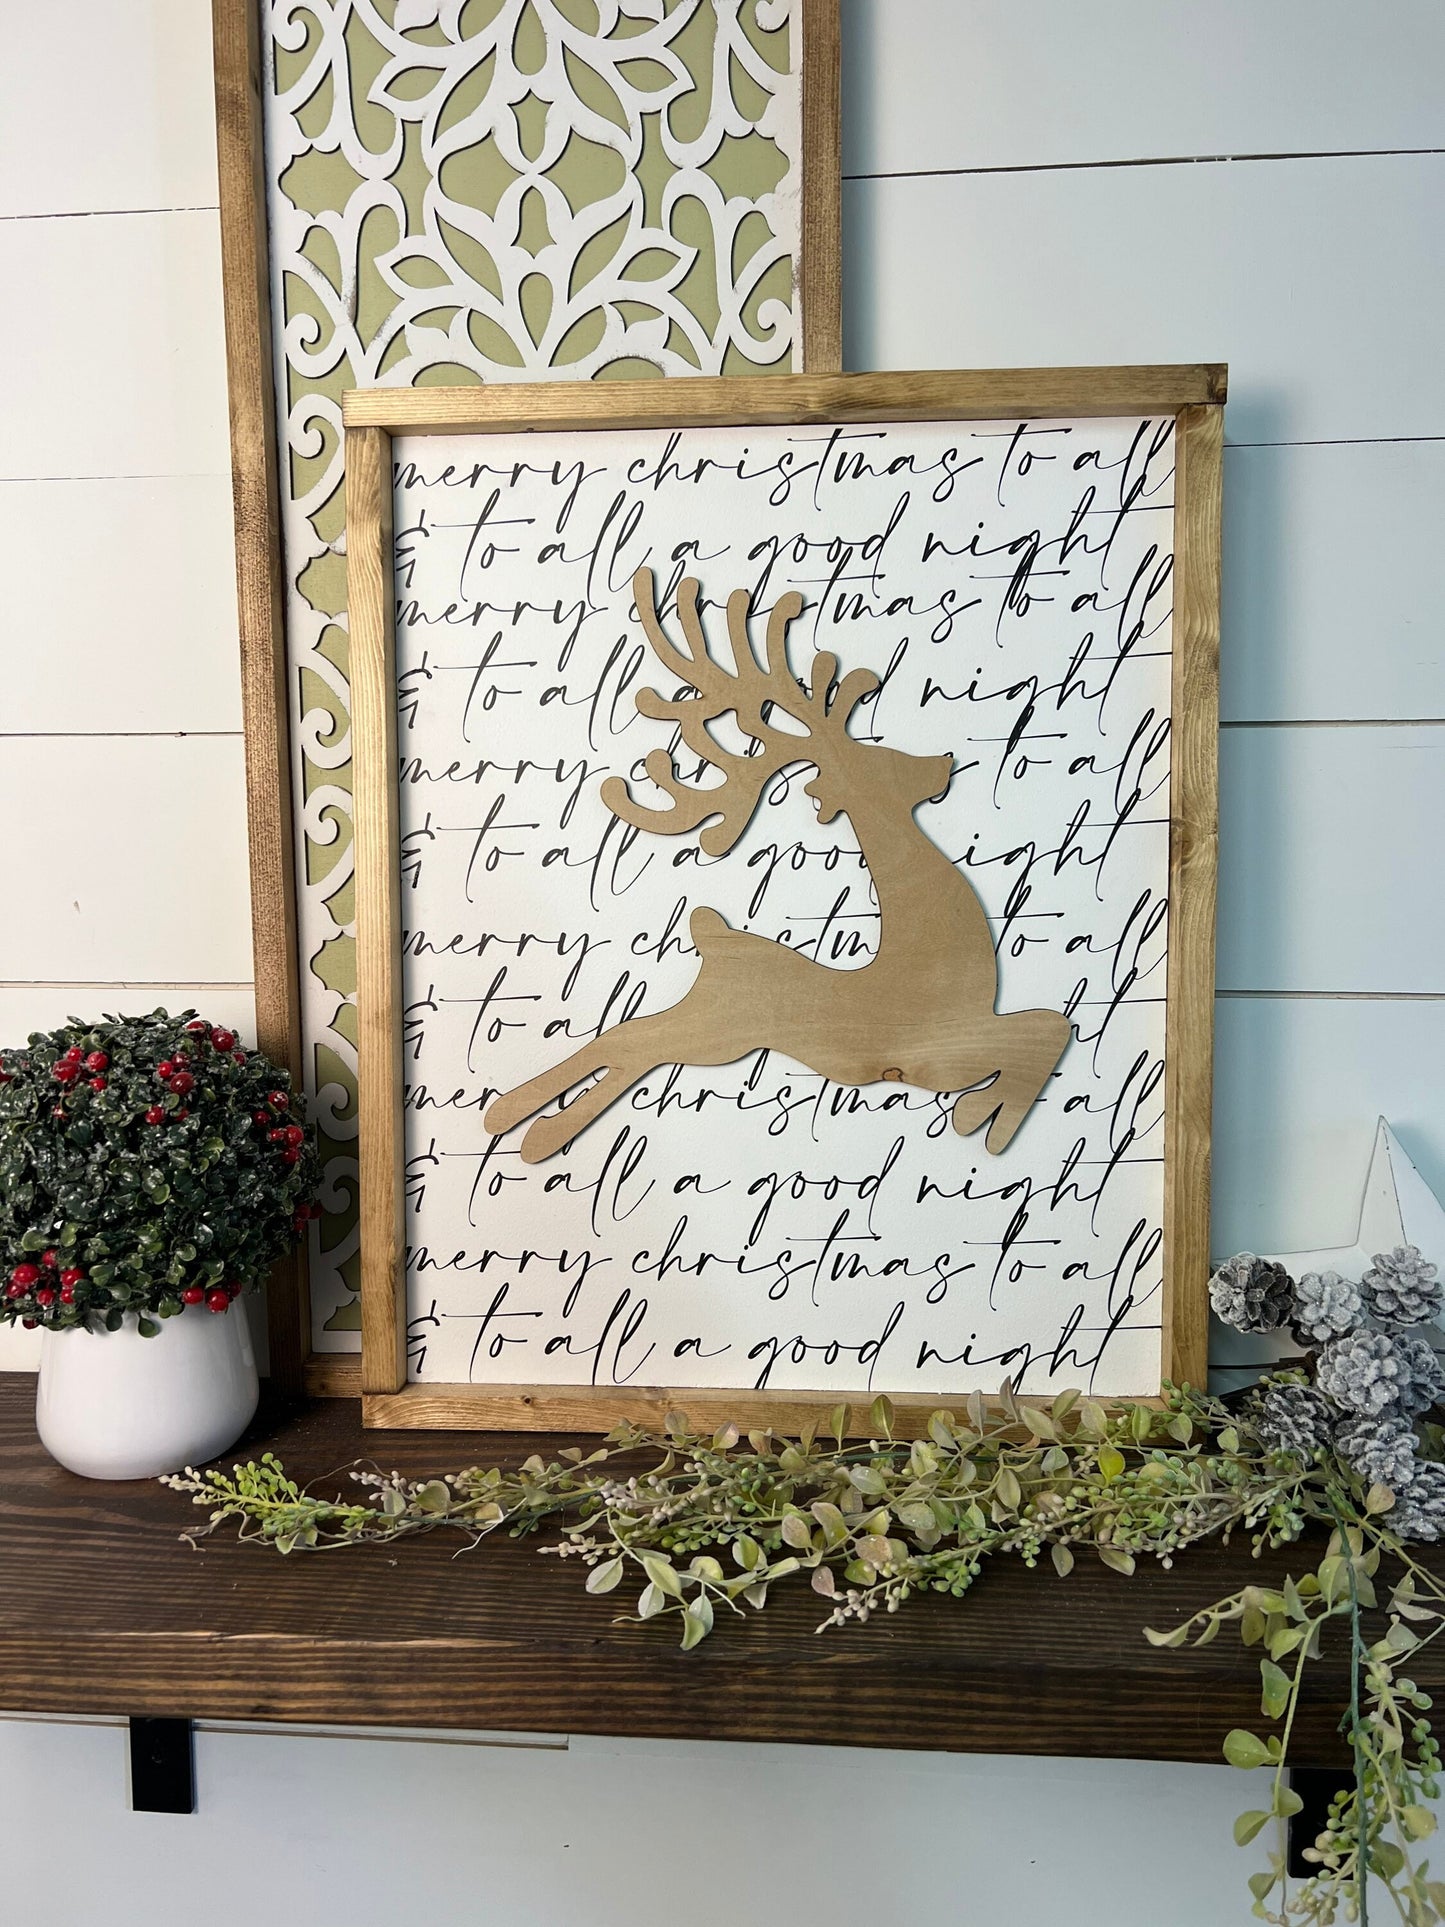 merry Christmas to all and to all a good night, reindeer - Christmas wood sign, mantle decor [FREE SHIPPING!]